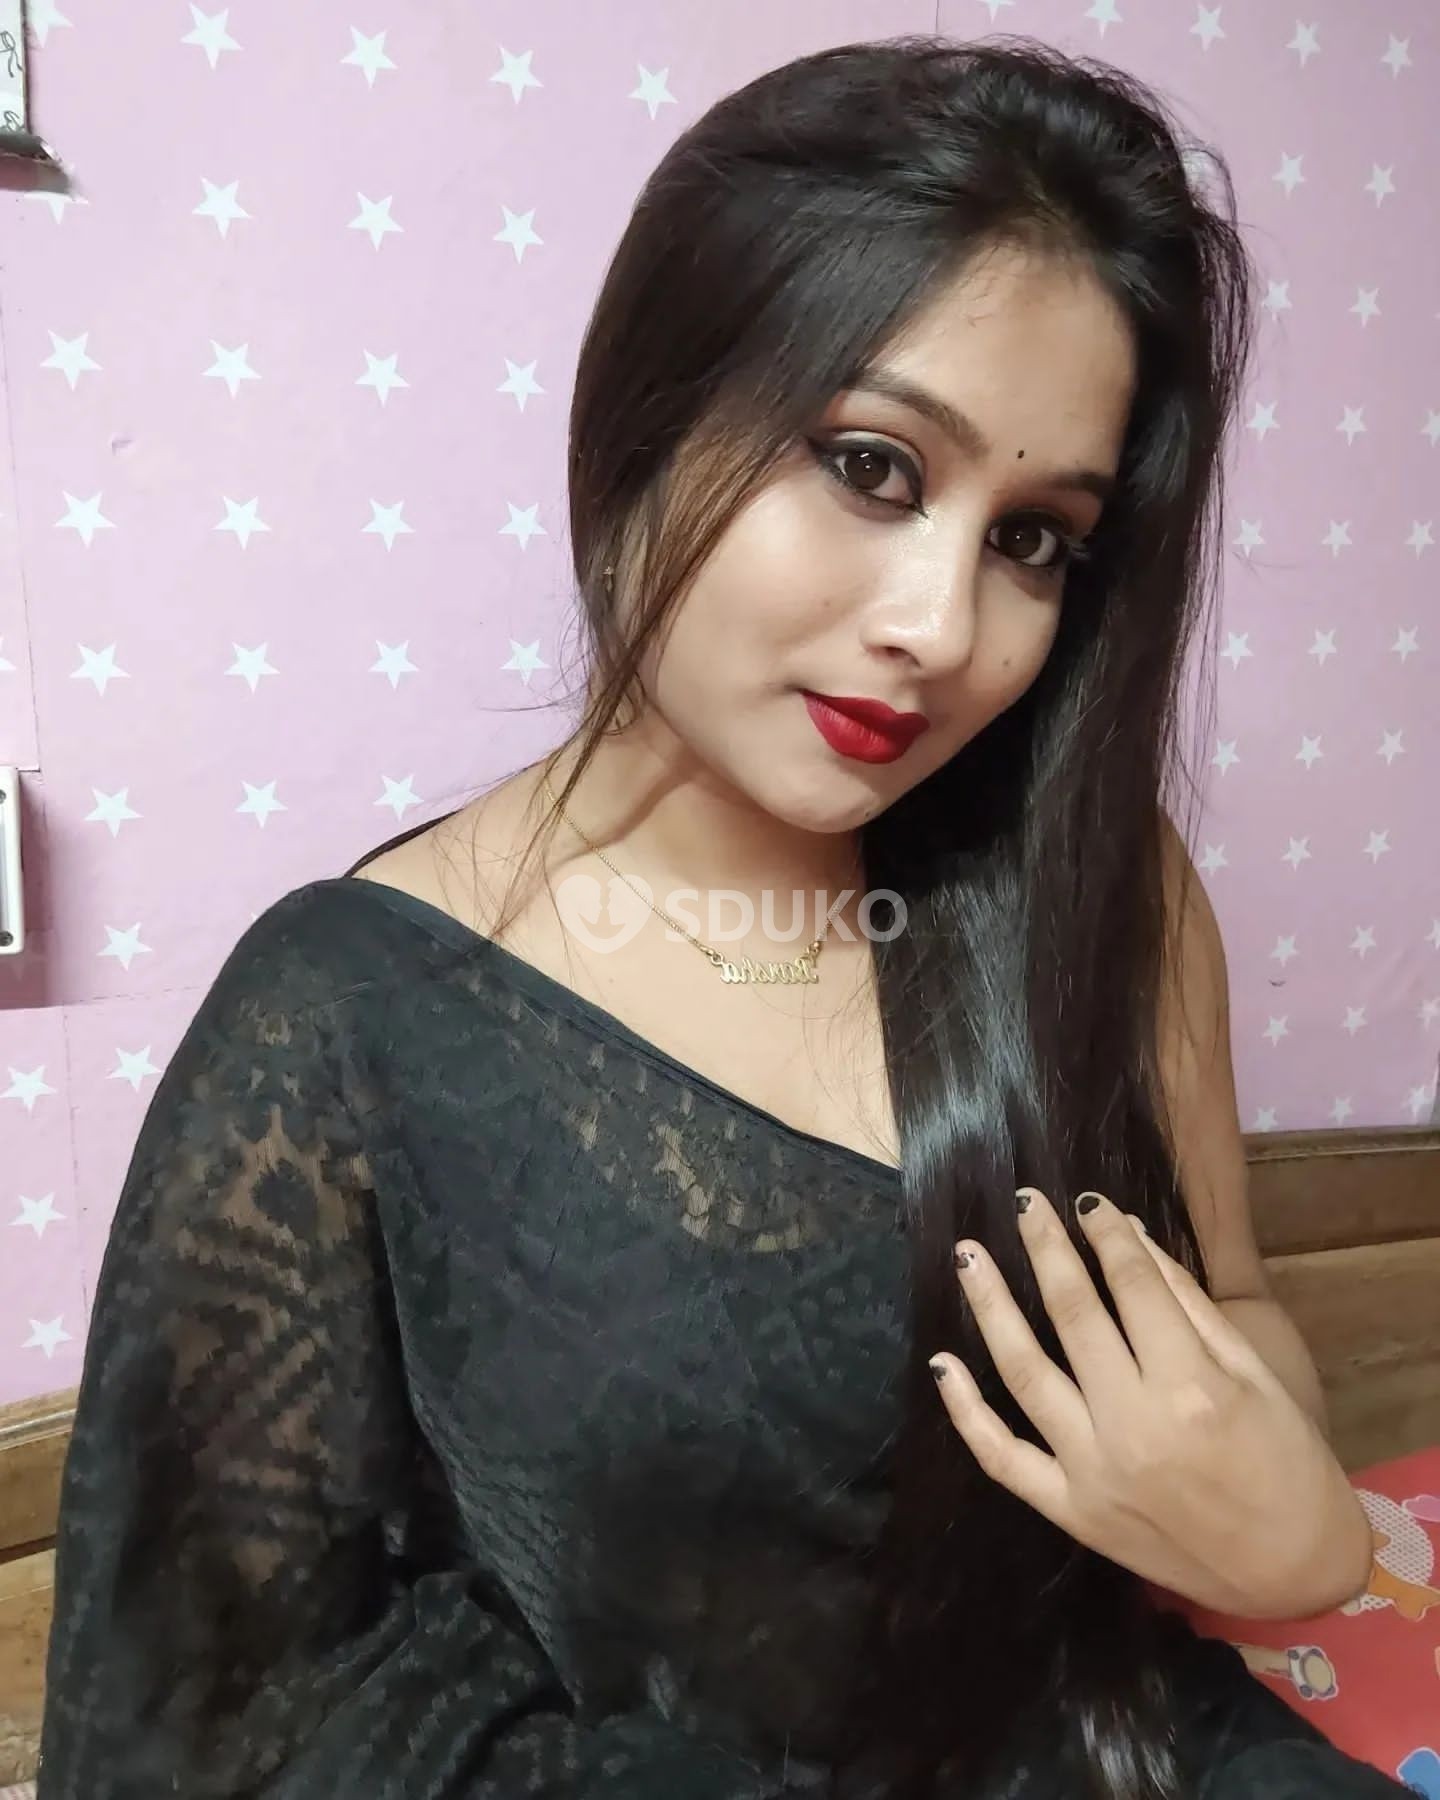 NASHIK BEST GENUINE 🌟 HIGH PROFILE HOTEL AND HOME SERVICE ANYTIME CALL ME 24/7 AVAILABLE